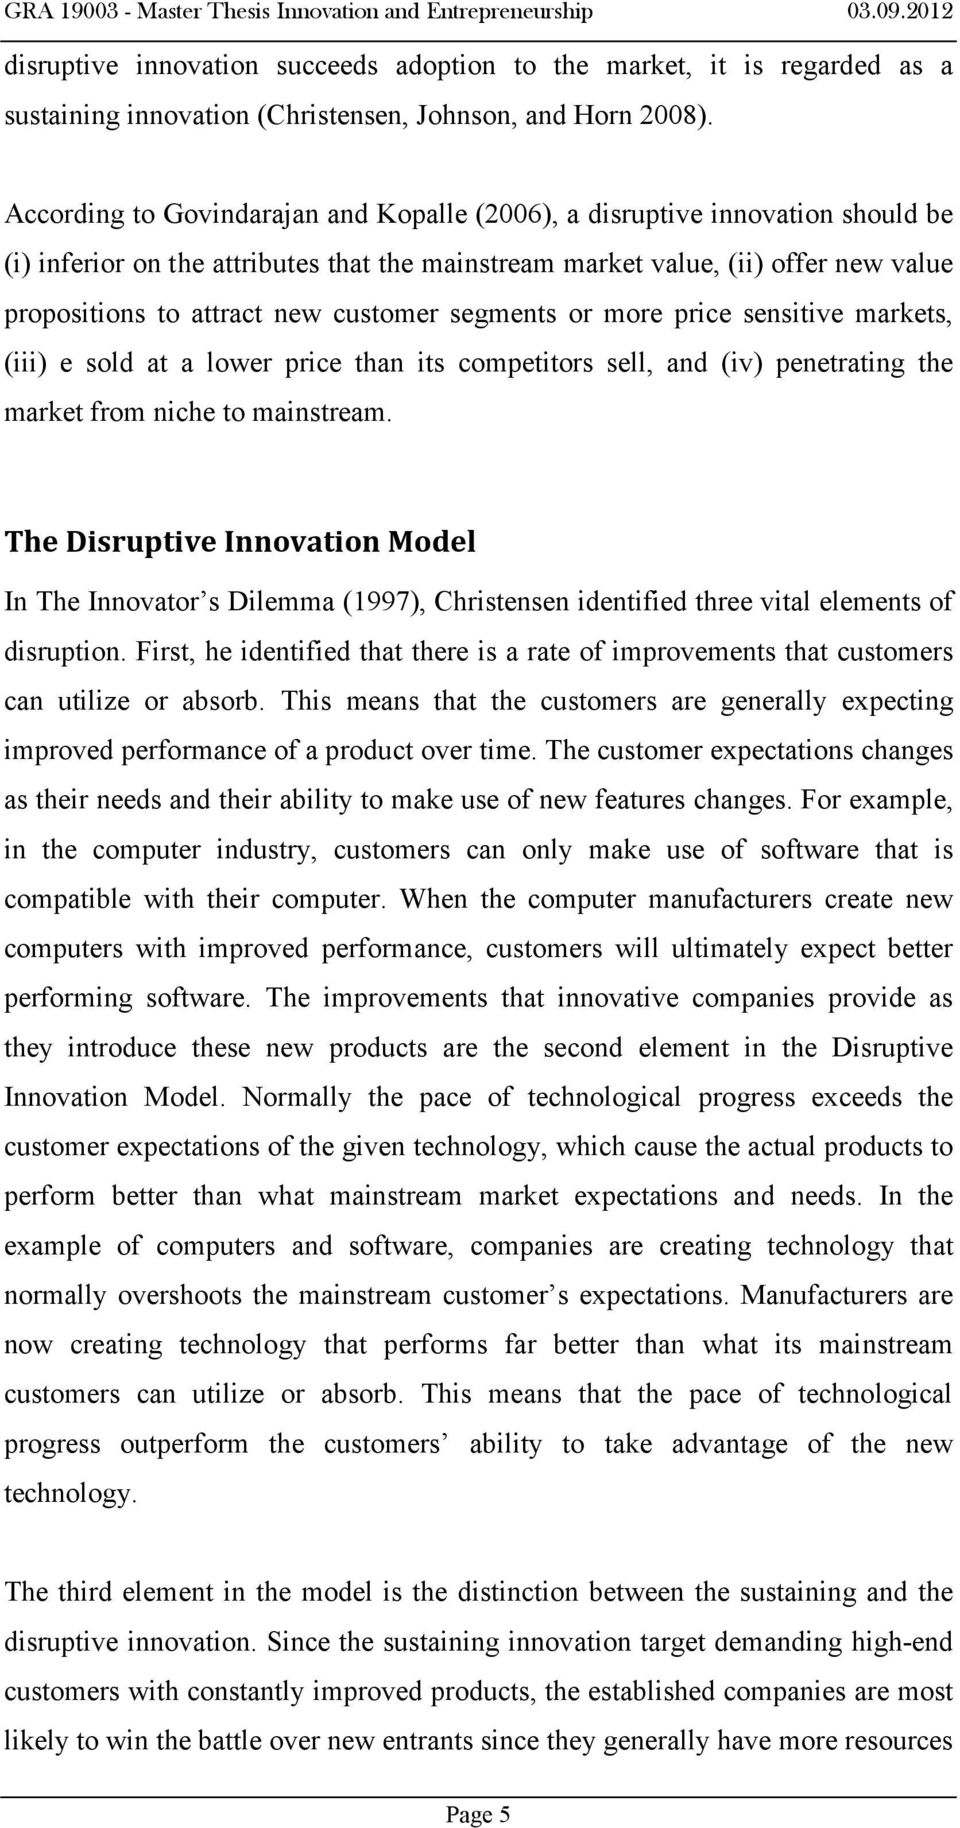 Sample thesis on innovation